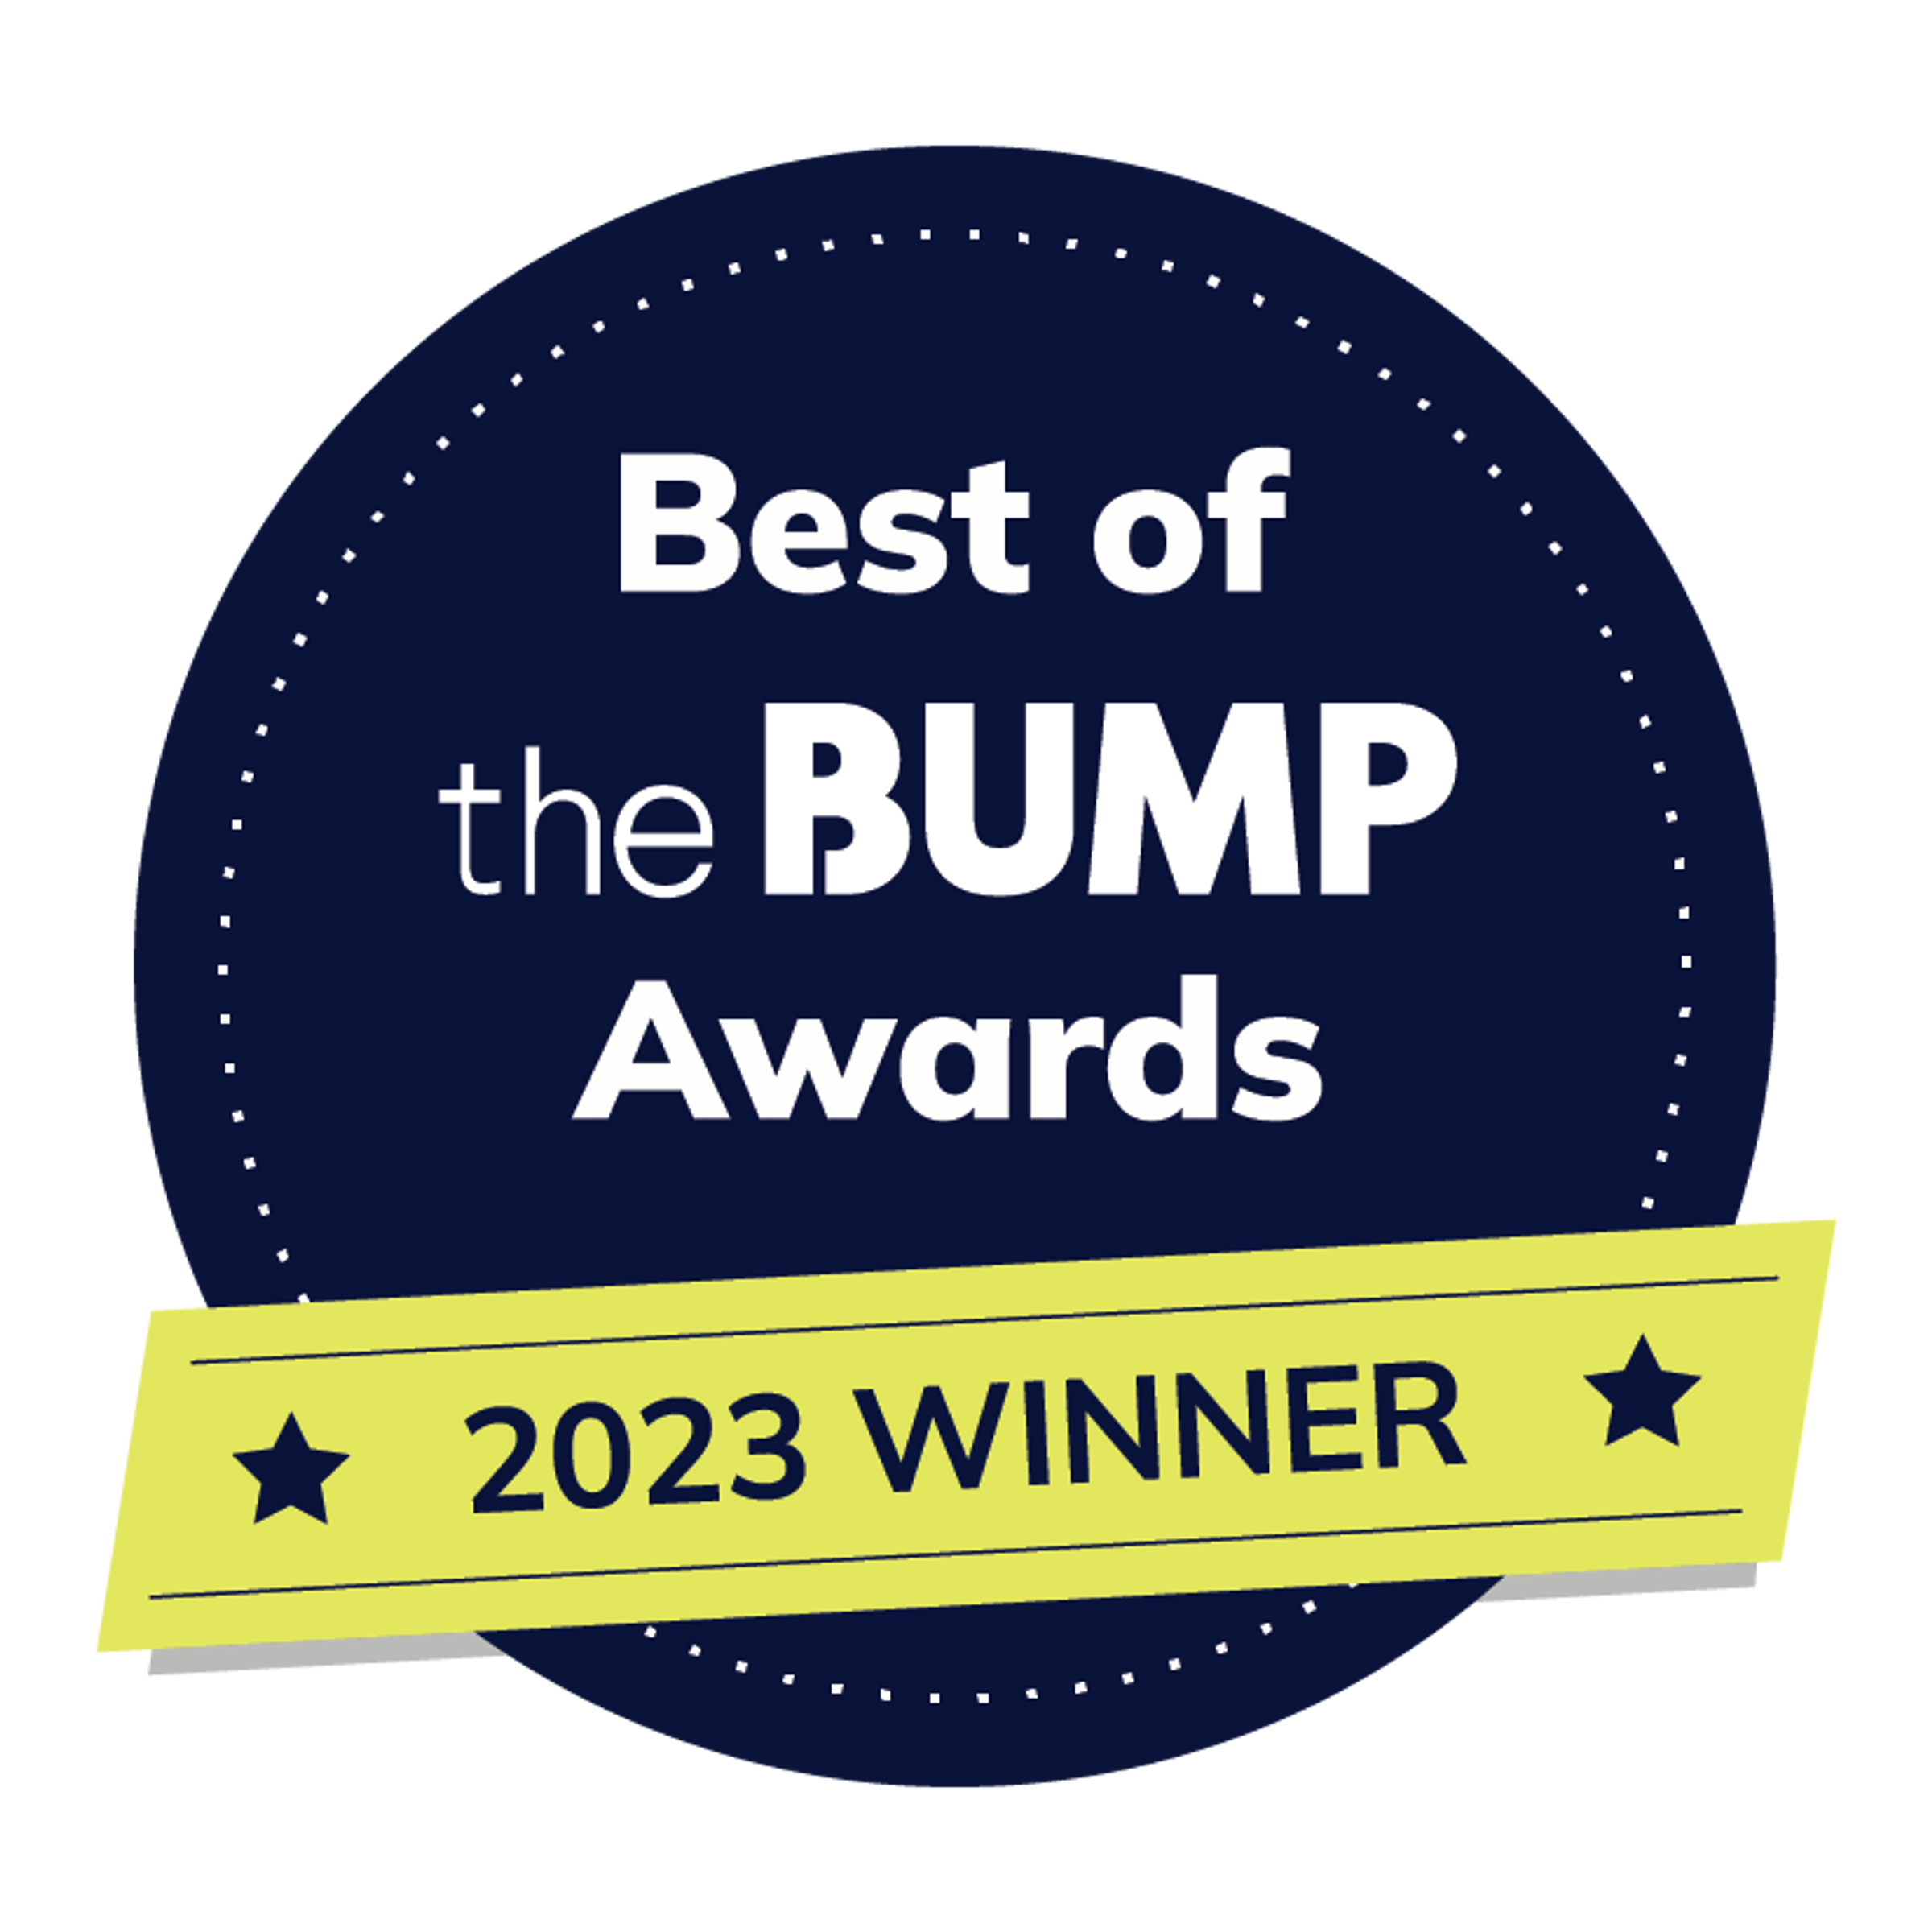 The Best of Baby Awards logo from The Bump for the year 2023.